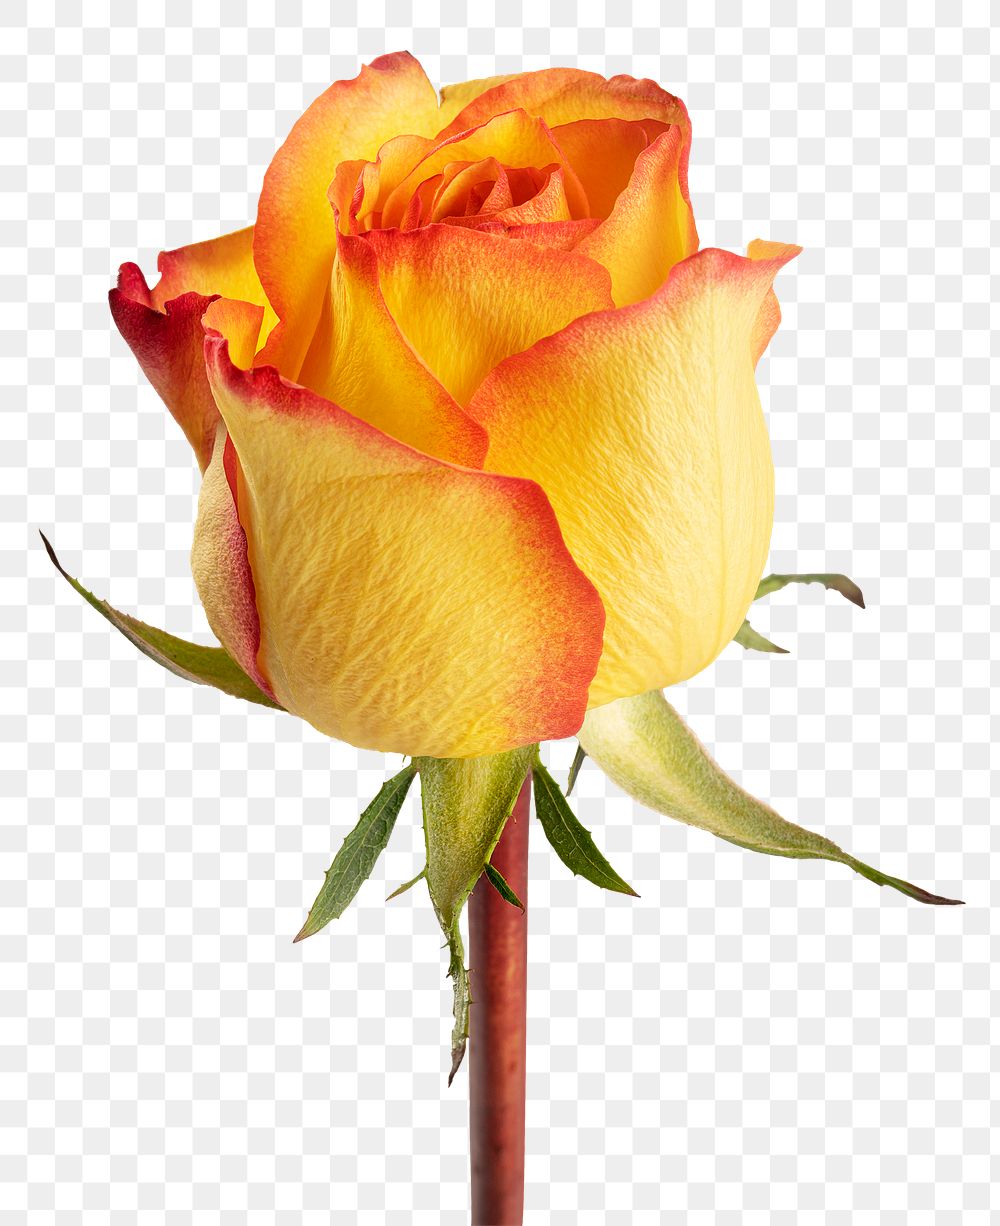 Yellow rose flower transparent png